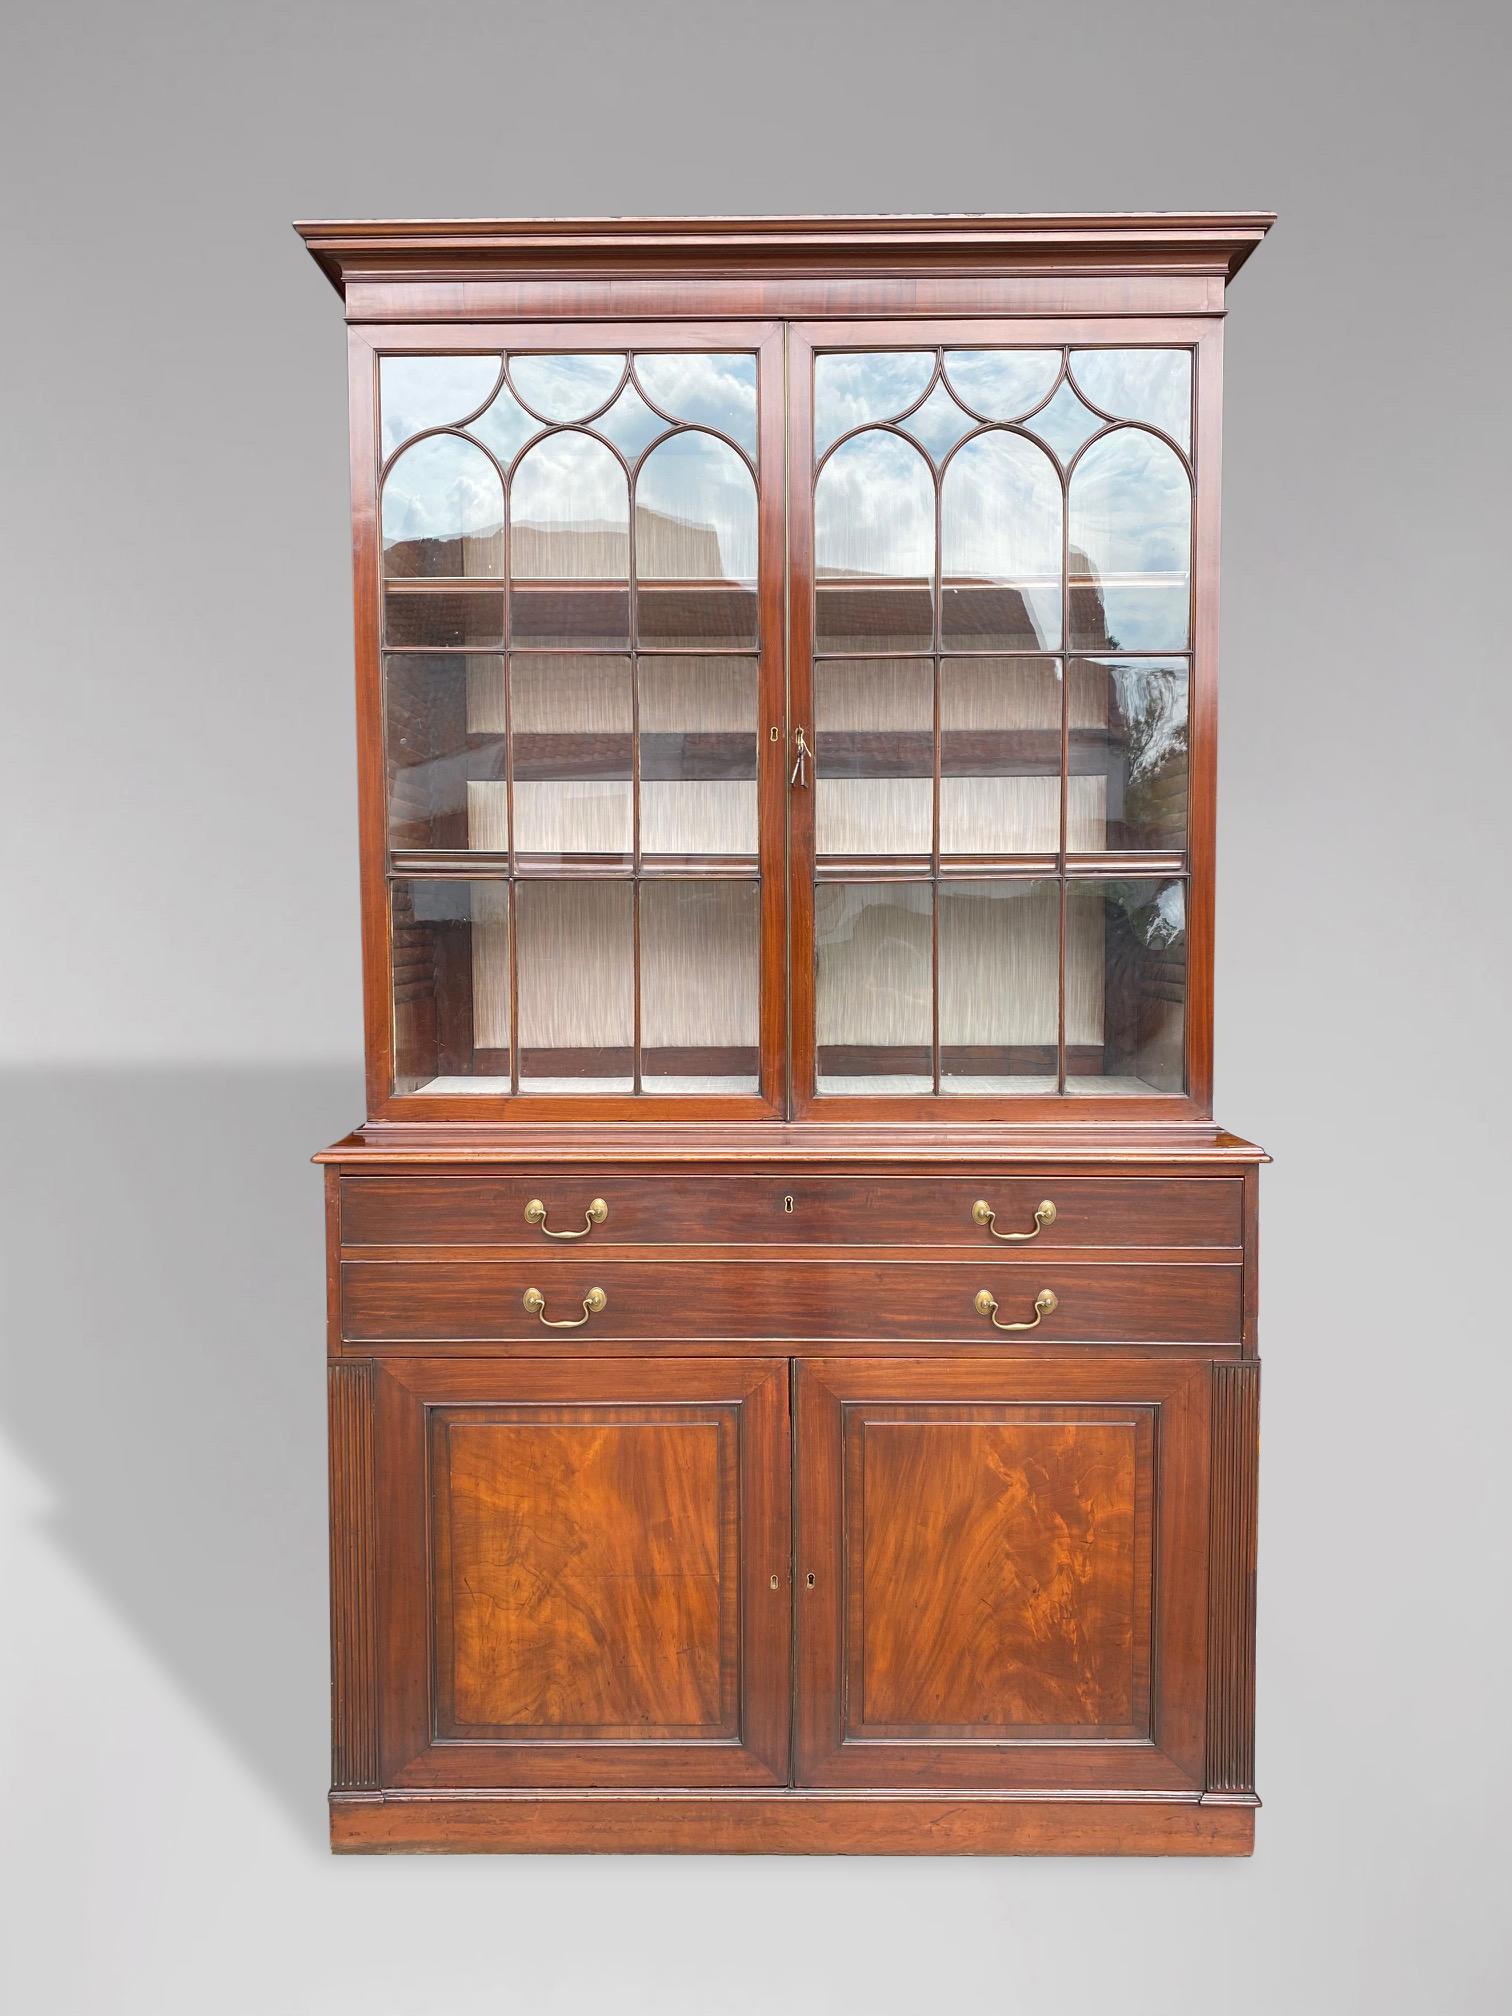 A stunning early 19th century, George III - Regency period solid mahogany secretaire bookcase. Well proportioned mahogany bookcase with astragal glazed 2-door cabinet over a fitted fall-front secretaire writing drawer with leather inset to top,